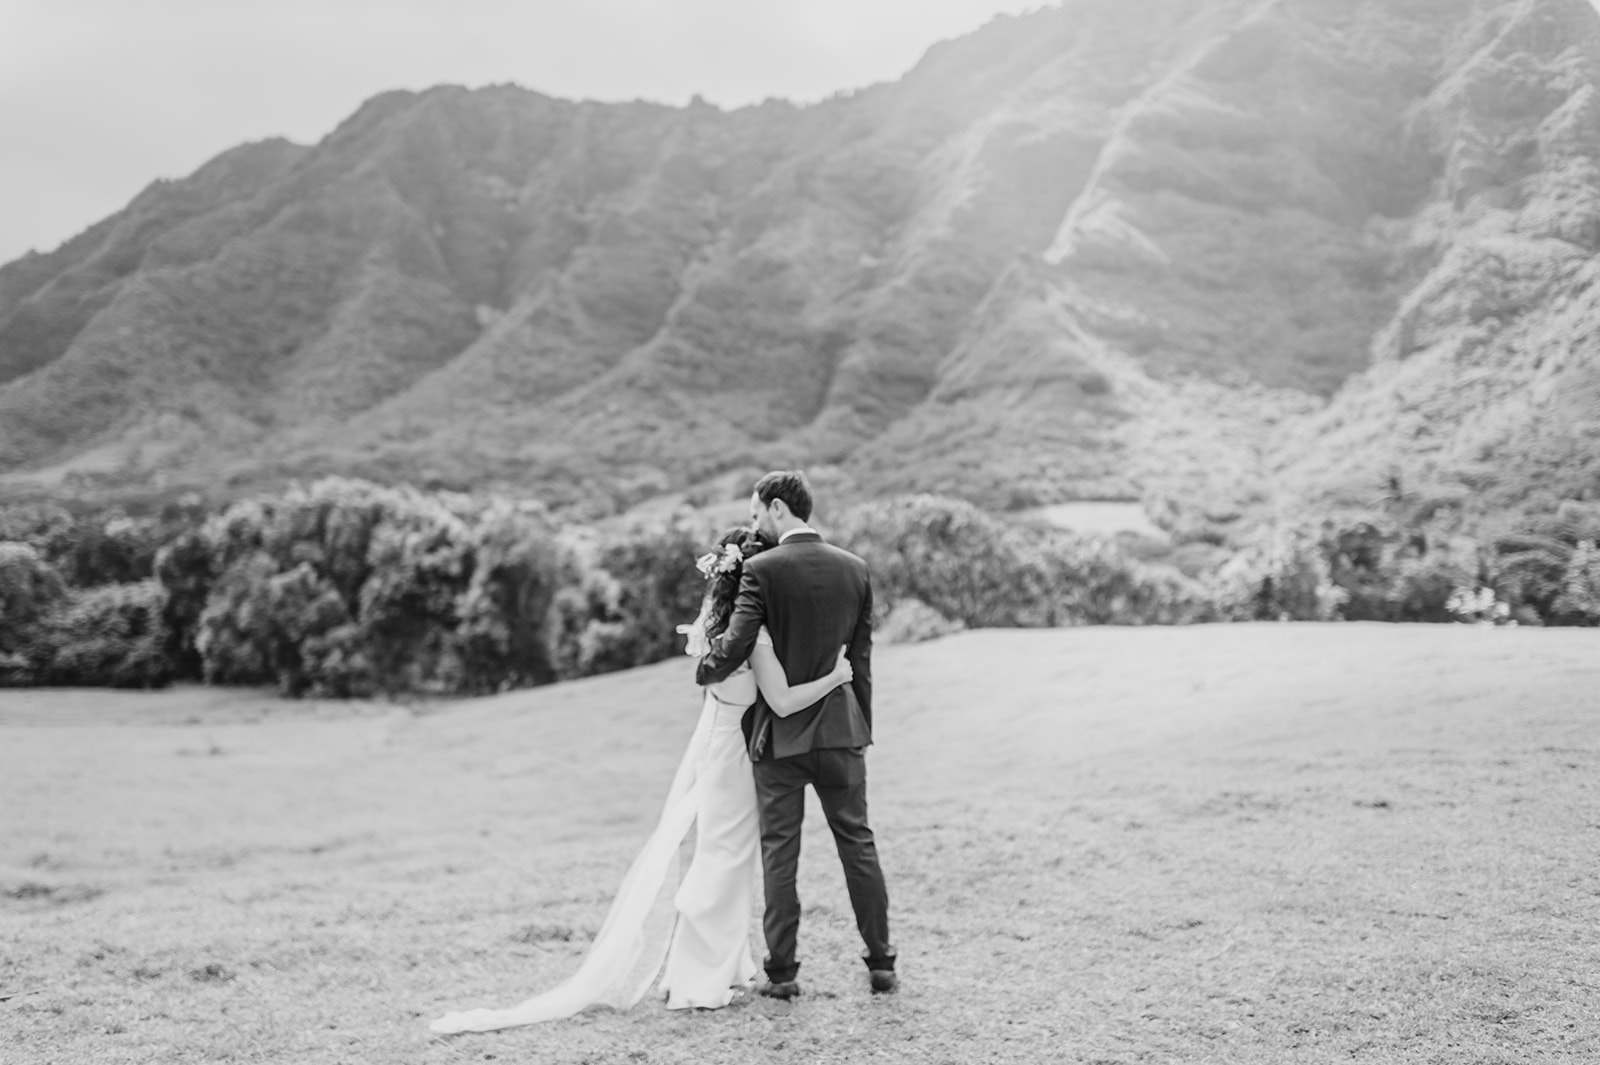 A tender embrace between the bride and groom against the backdrop of majestic mountains L Hewitt Photography